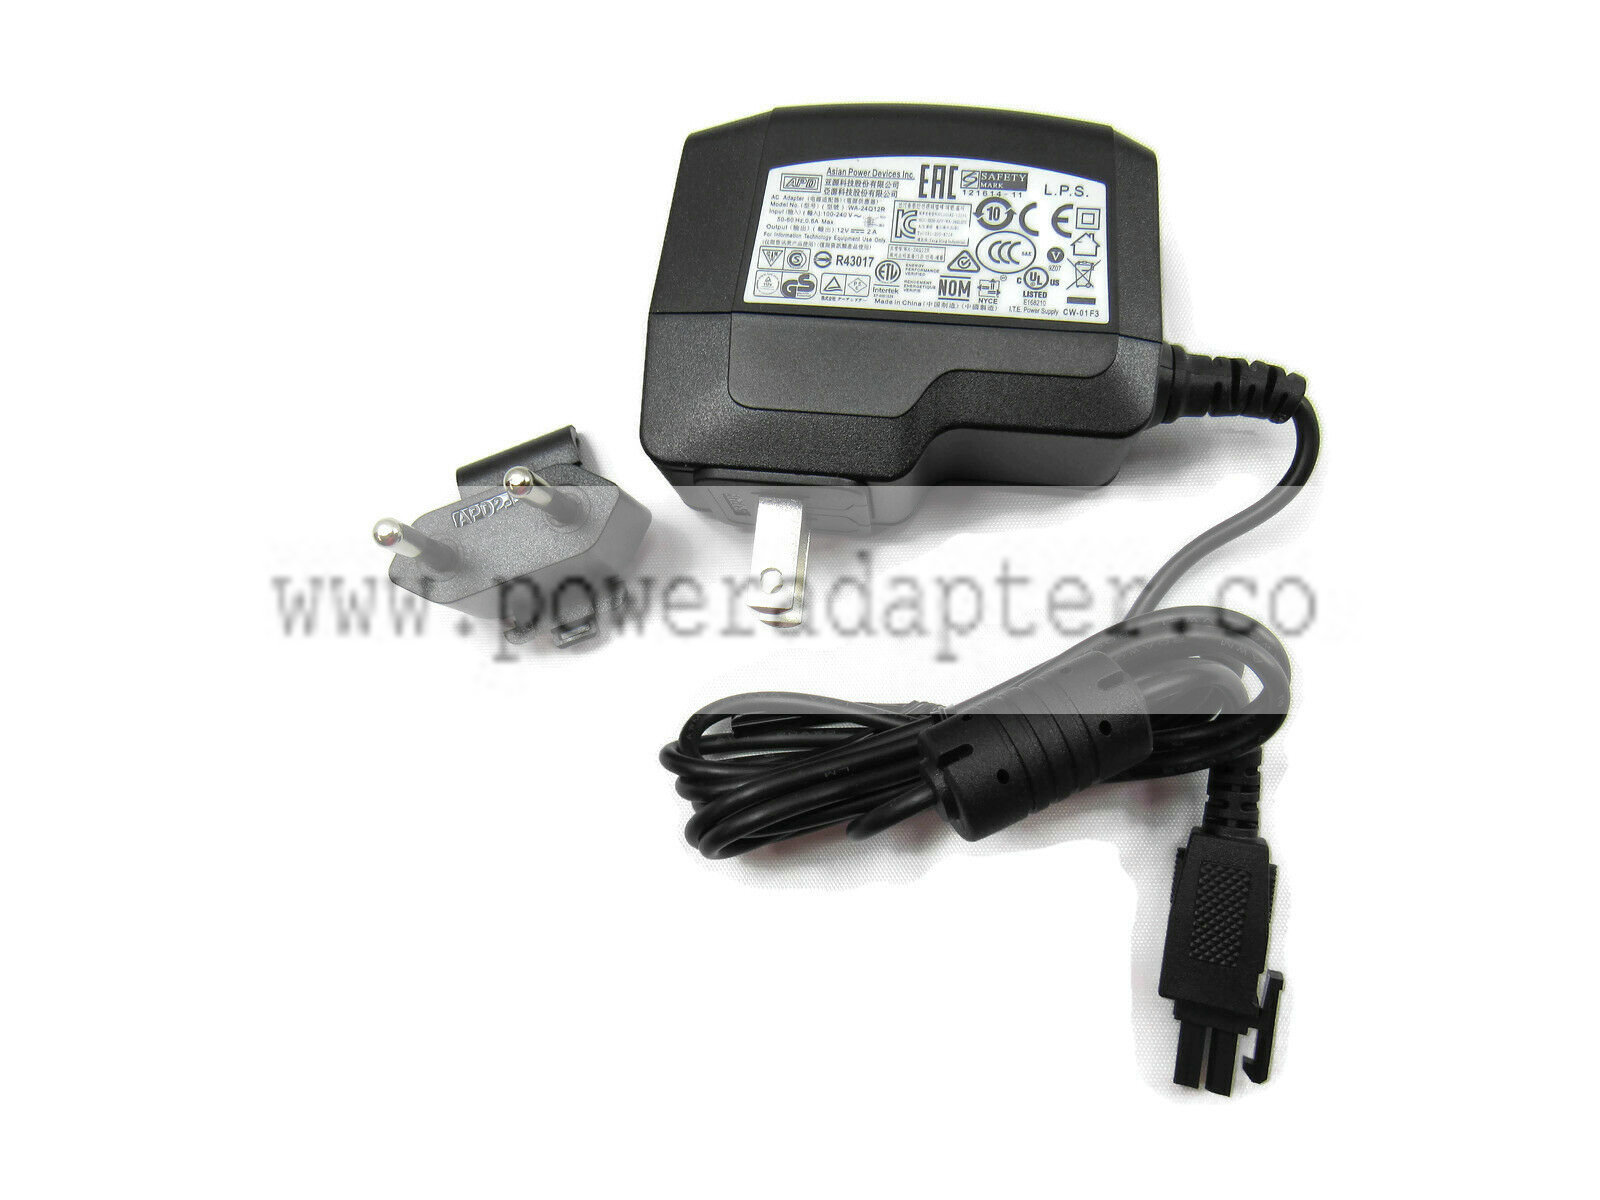 APD Asian Power Devices Model WA-24Q12R AC Adapter With EU Clip New Model: WA-24Q12R Type: AC/DC Adapter Modified Item